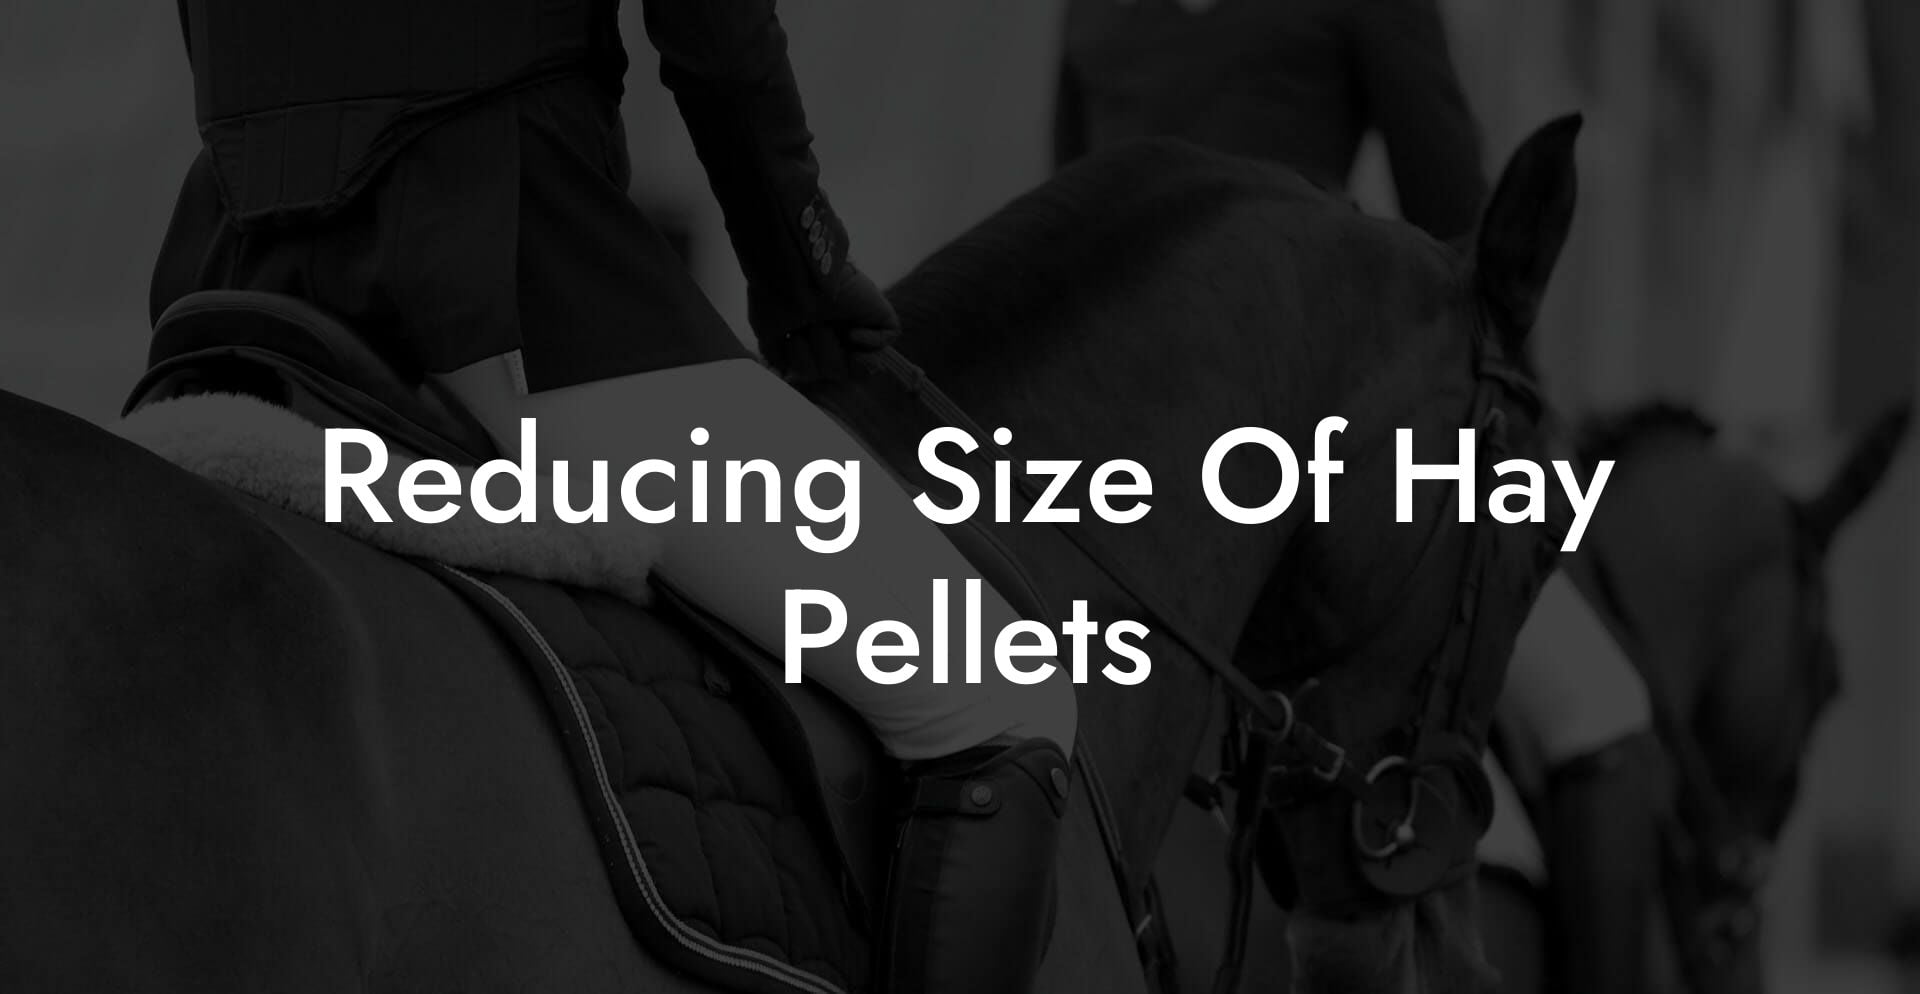 Reducing Size Of Hay Pellets